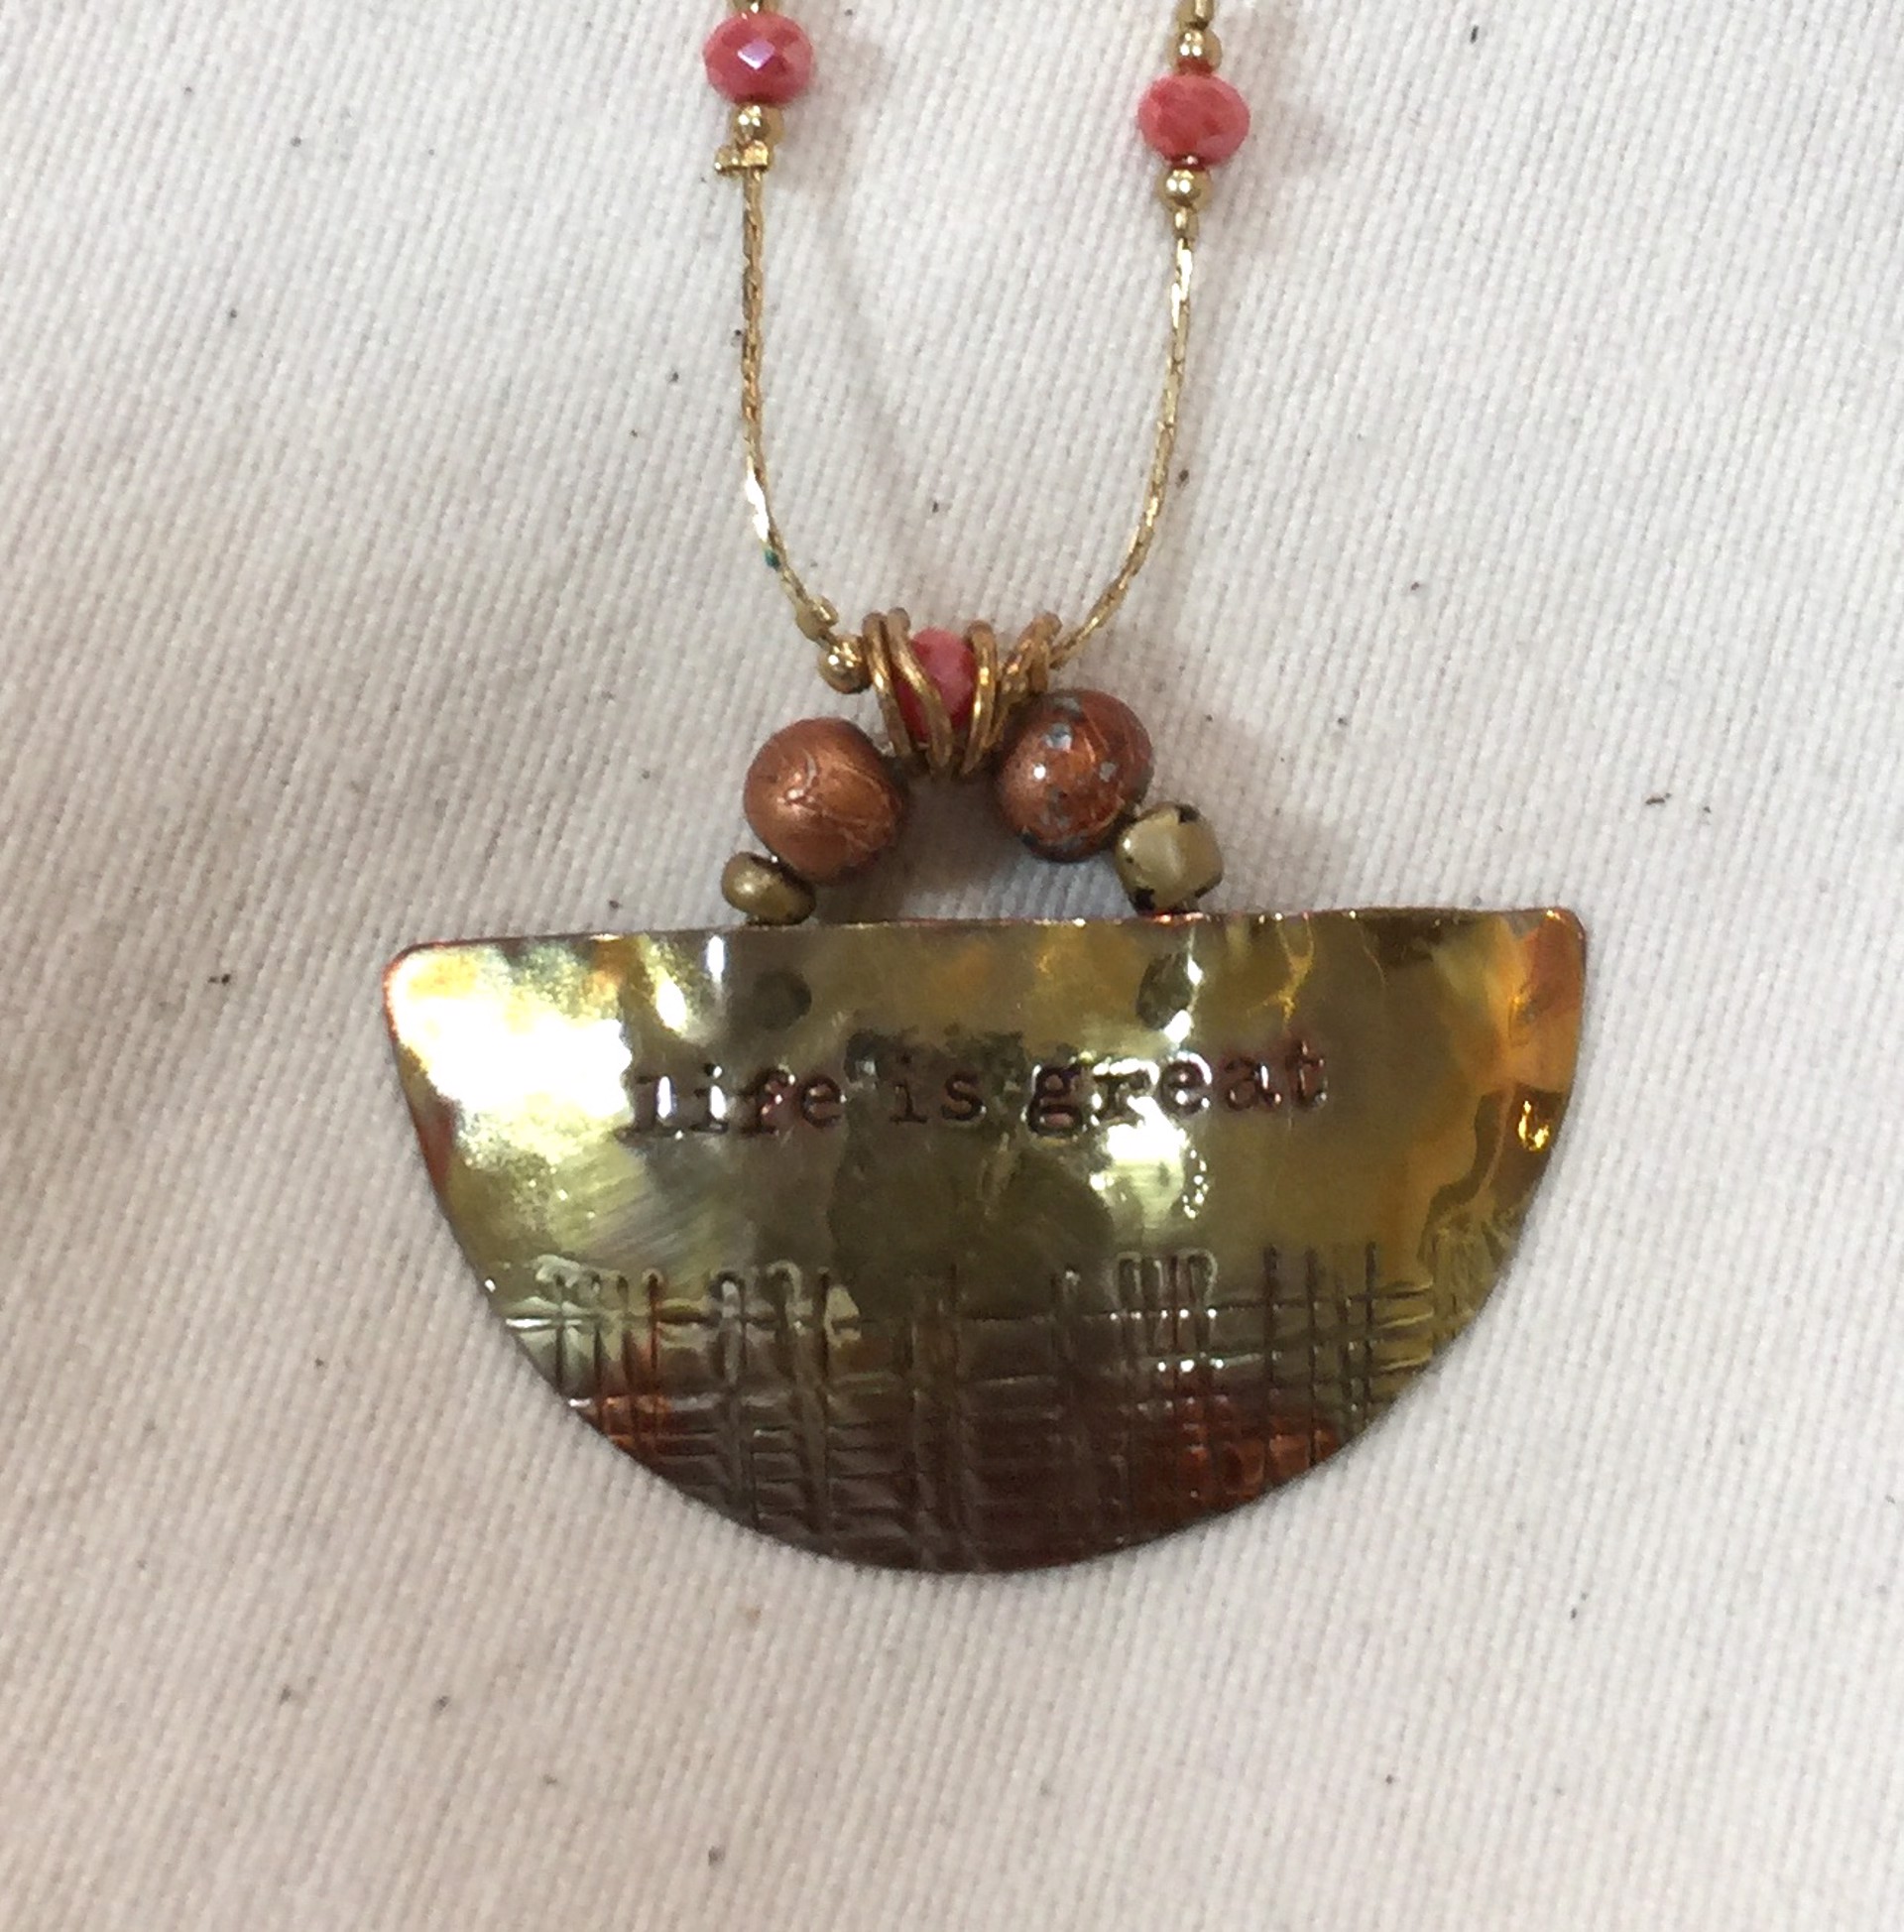 Necklace - "Life Is Great" Brass & Coral #2004 by Vesta Abel